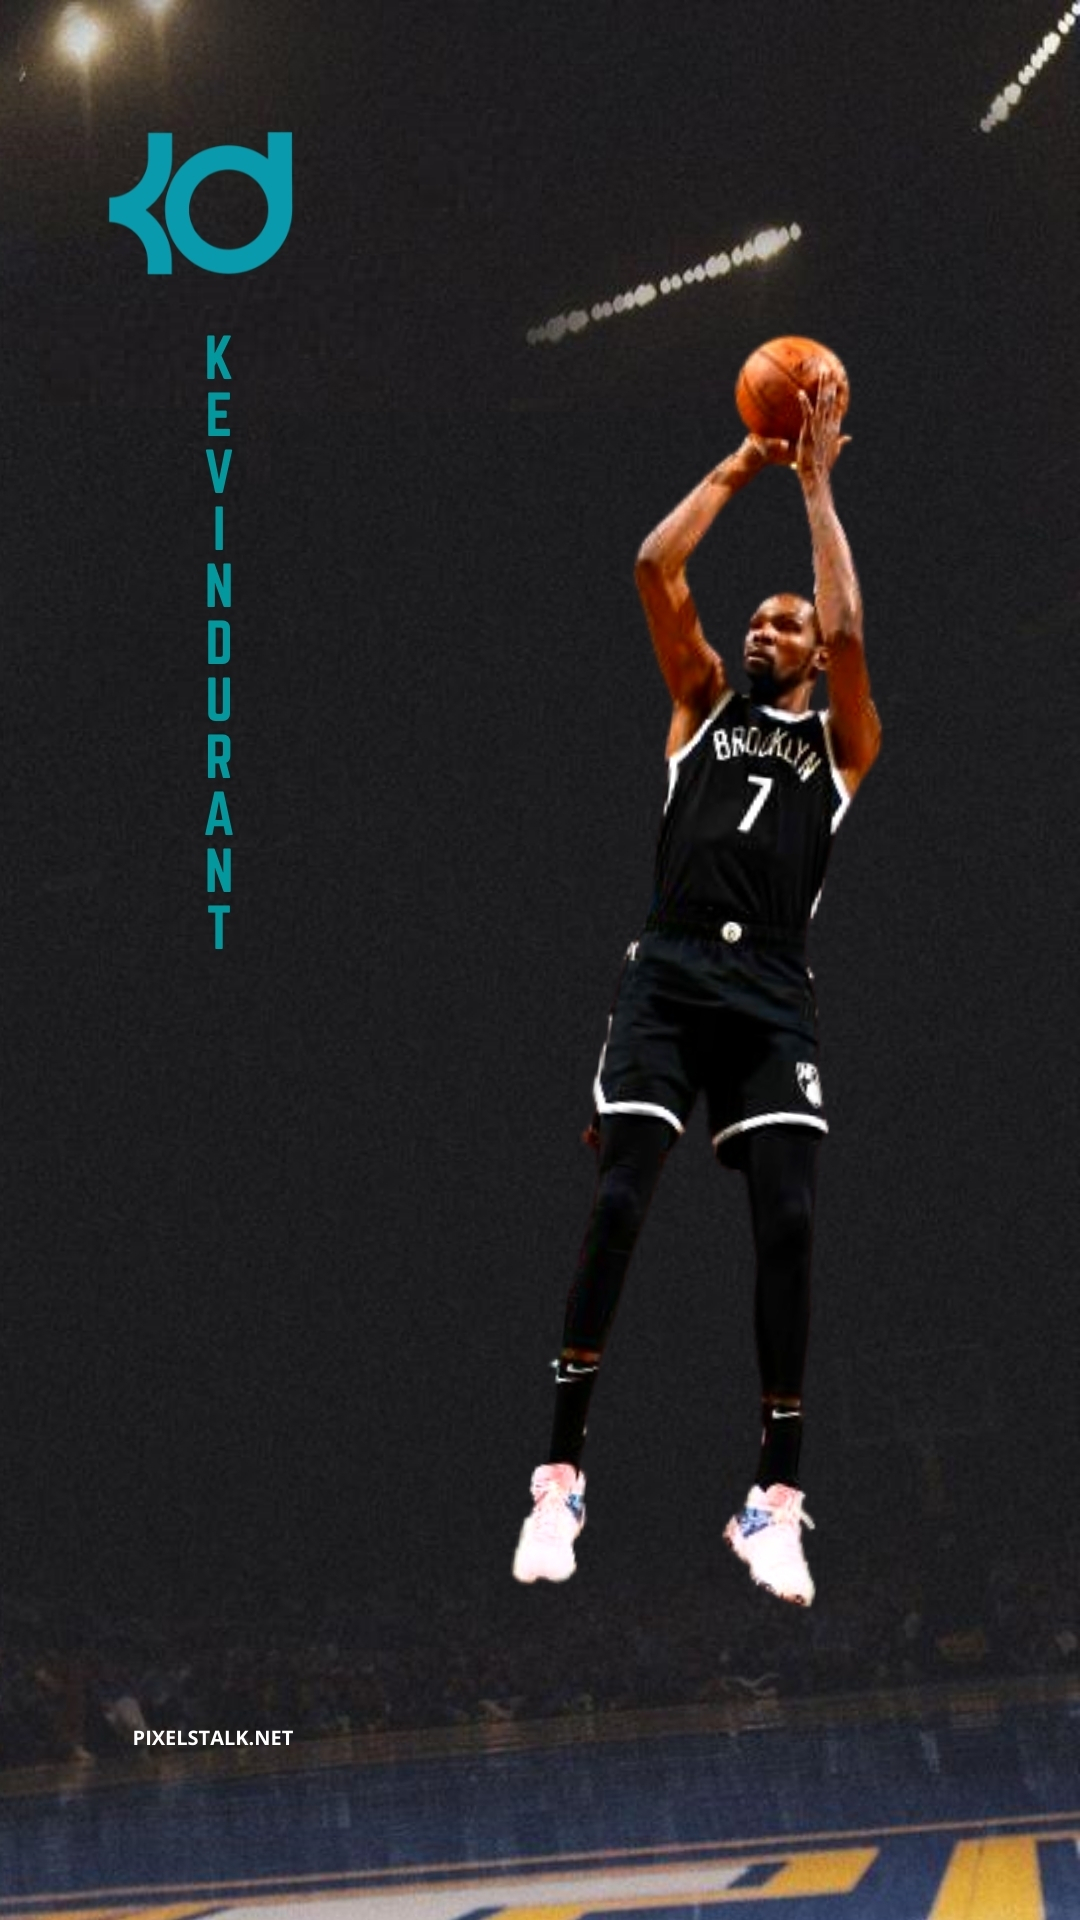 Details more than 71 kevin durant wallpaper nets - in.cdgdbentre